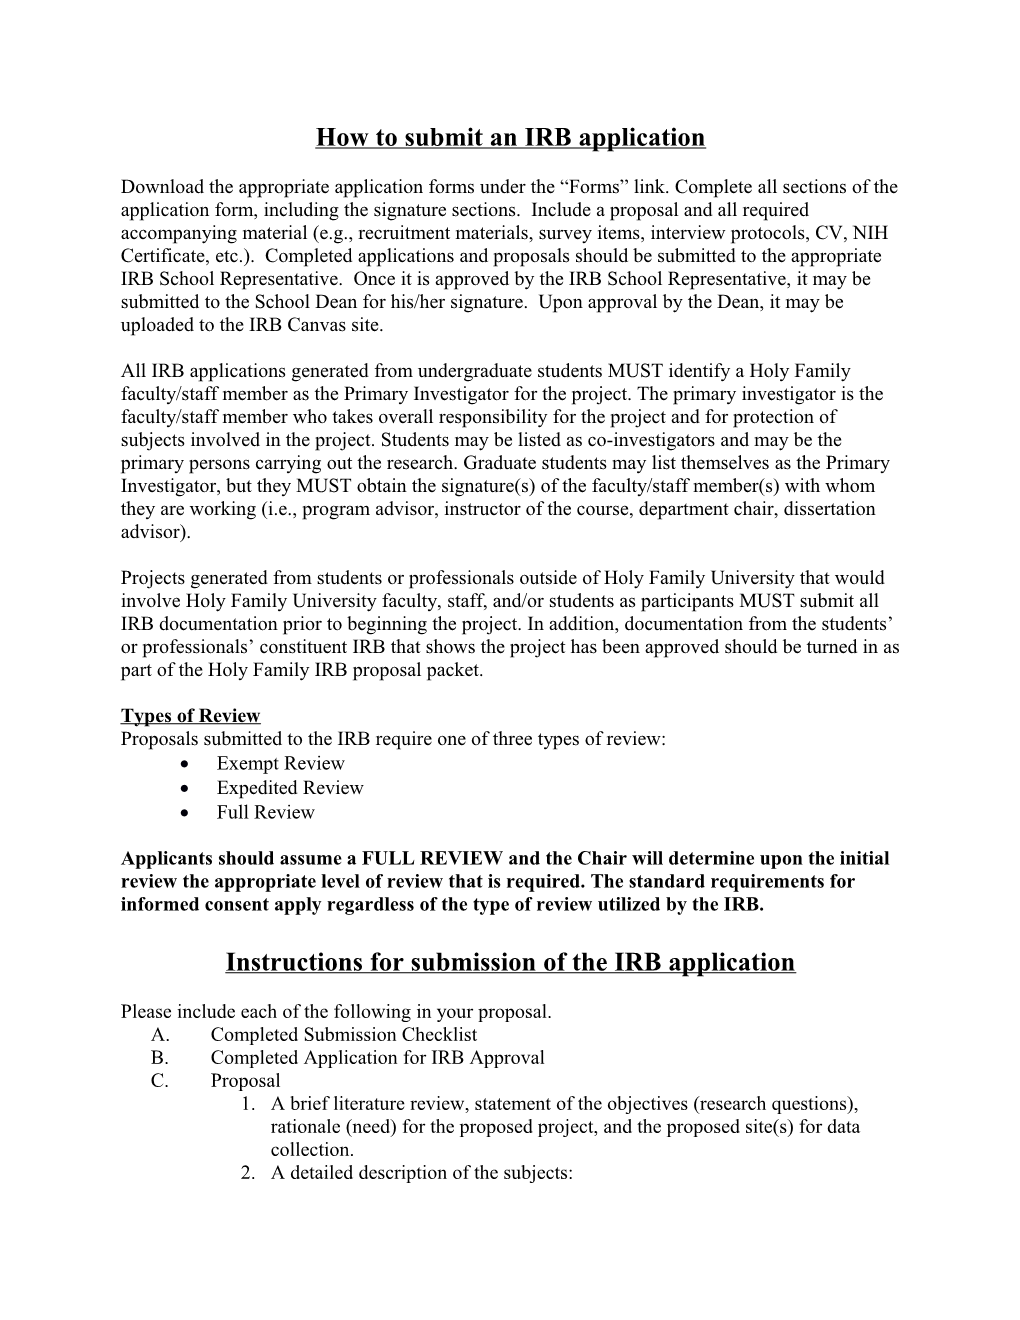 How to Submit an IRB Application